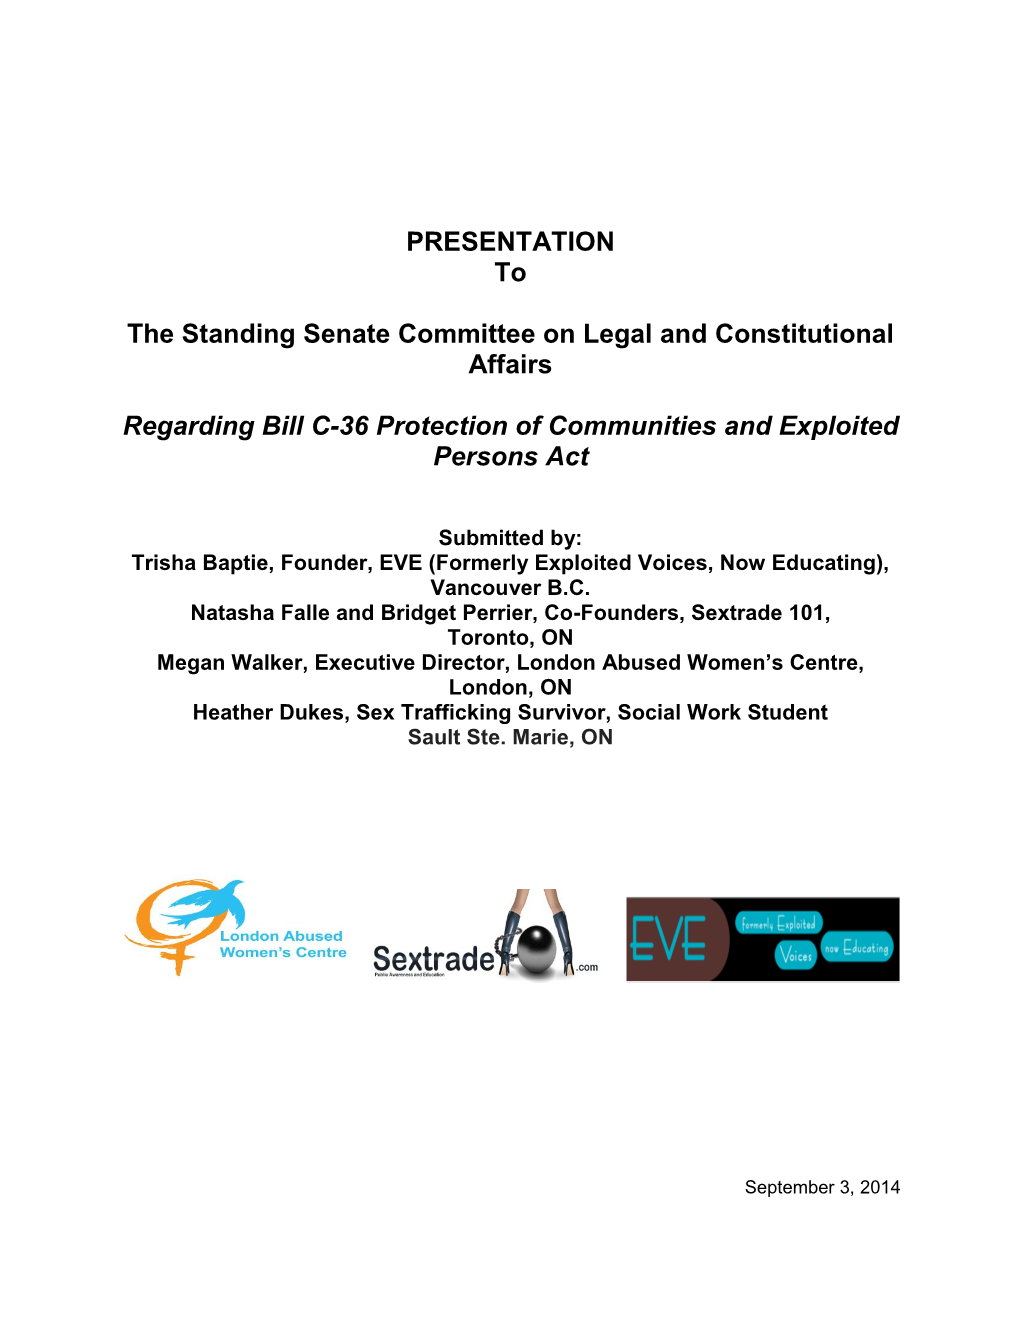 PRESENTATION to the Standing Senate Committee on Legal And